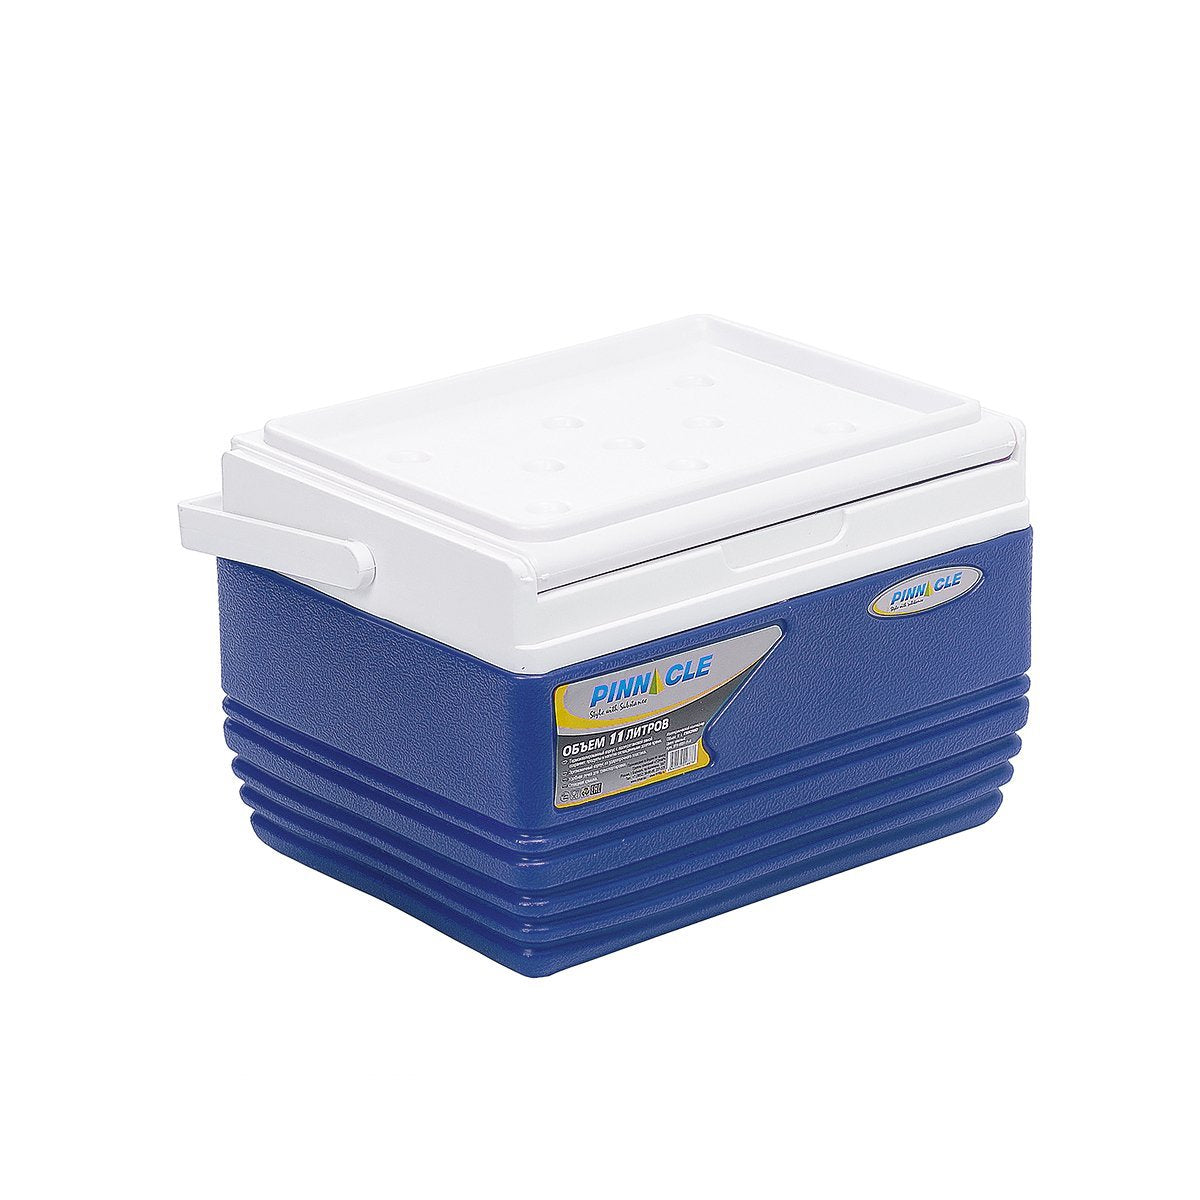 Eskimo Portable Hard-Sided Ice Chest for Camping, 11 qt, Navy Blue